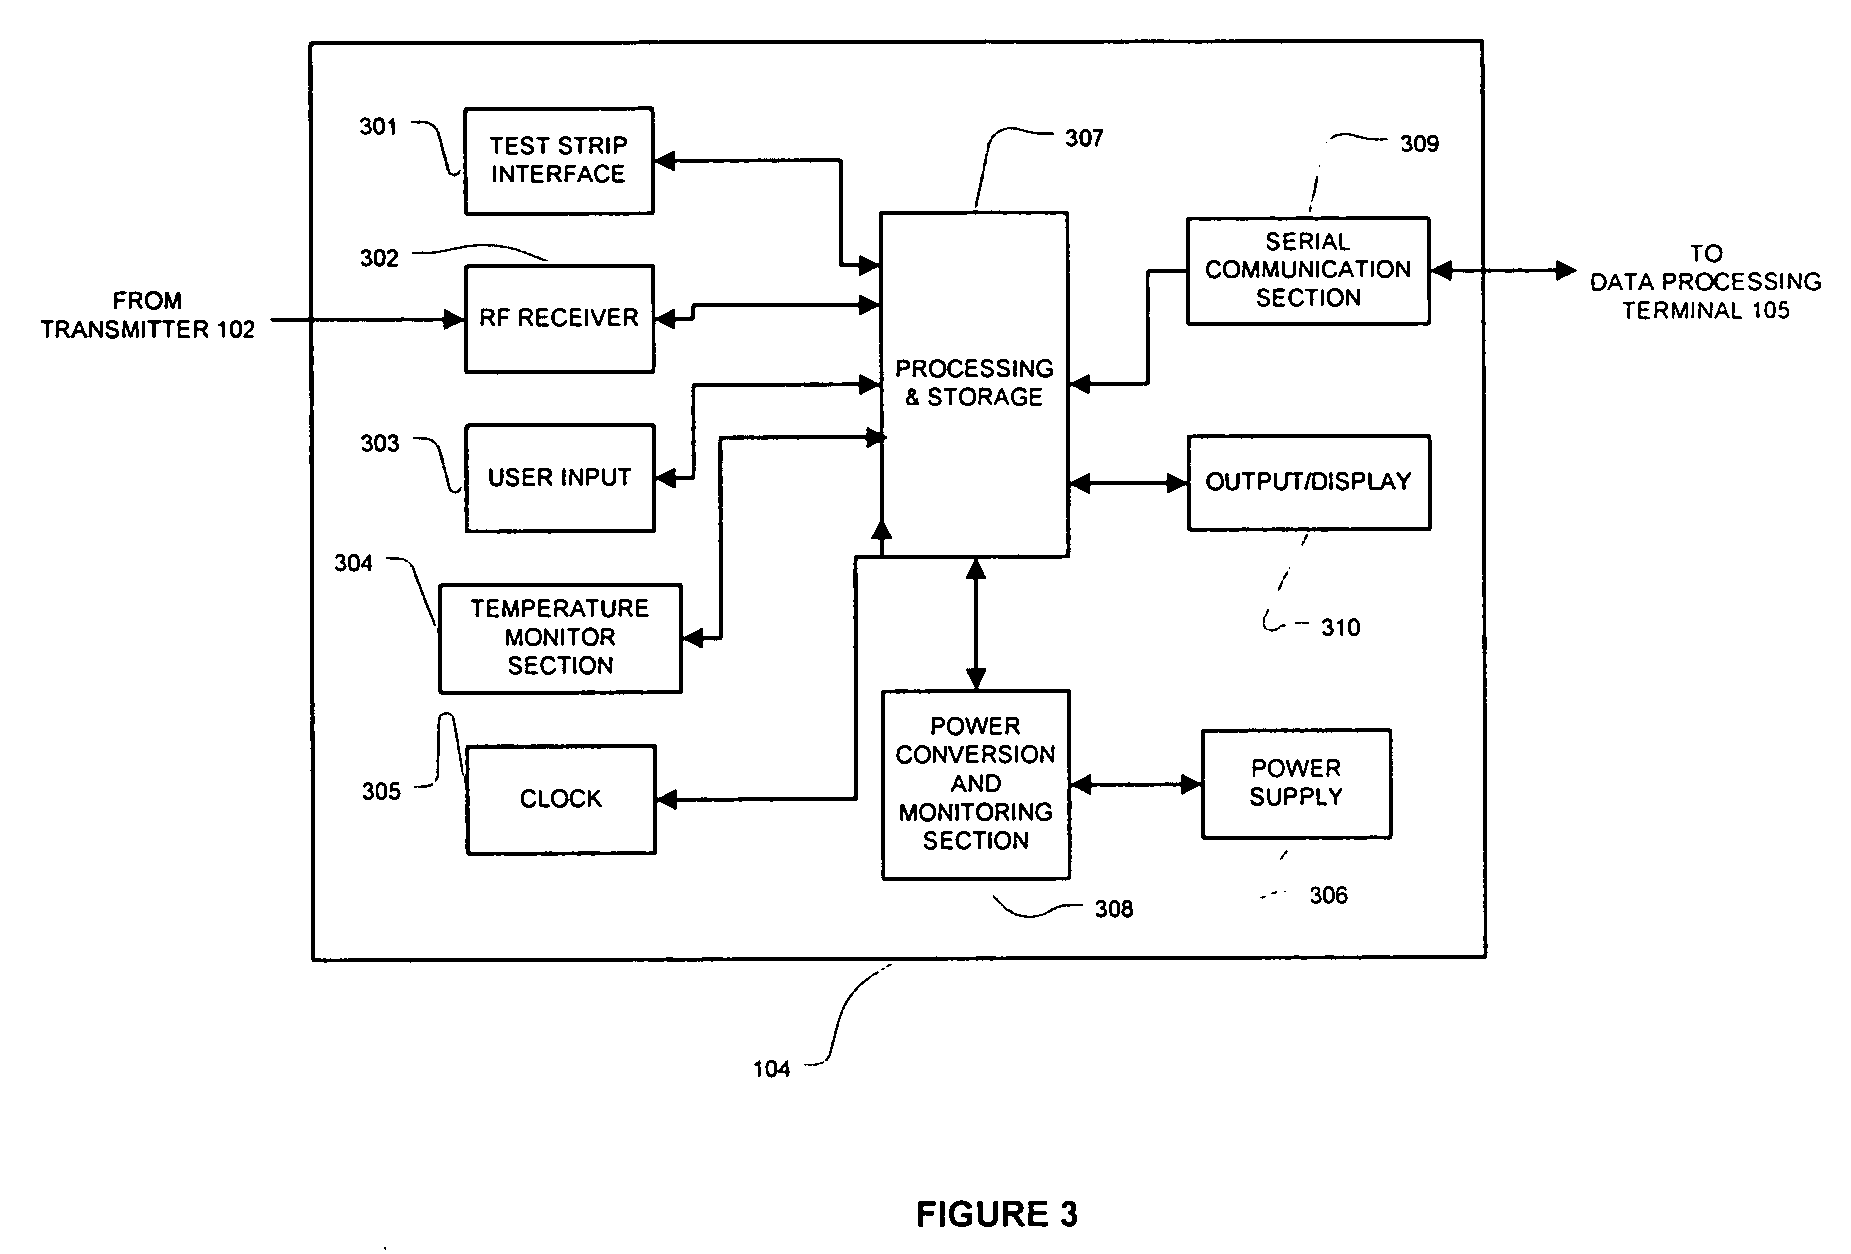 Analyte monitoring and management system and methods therefor